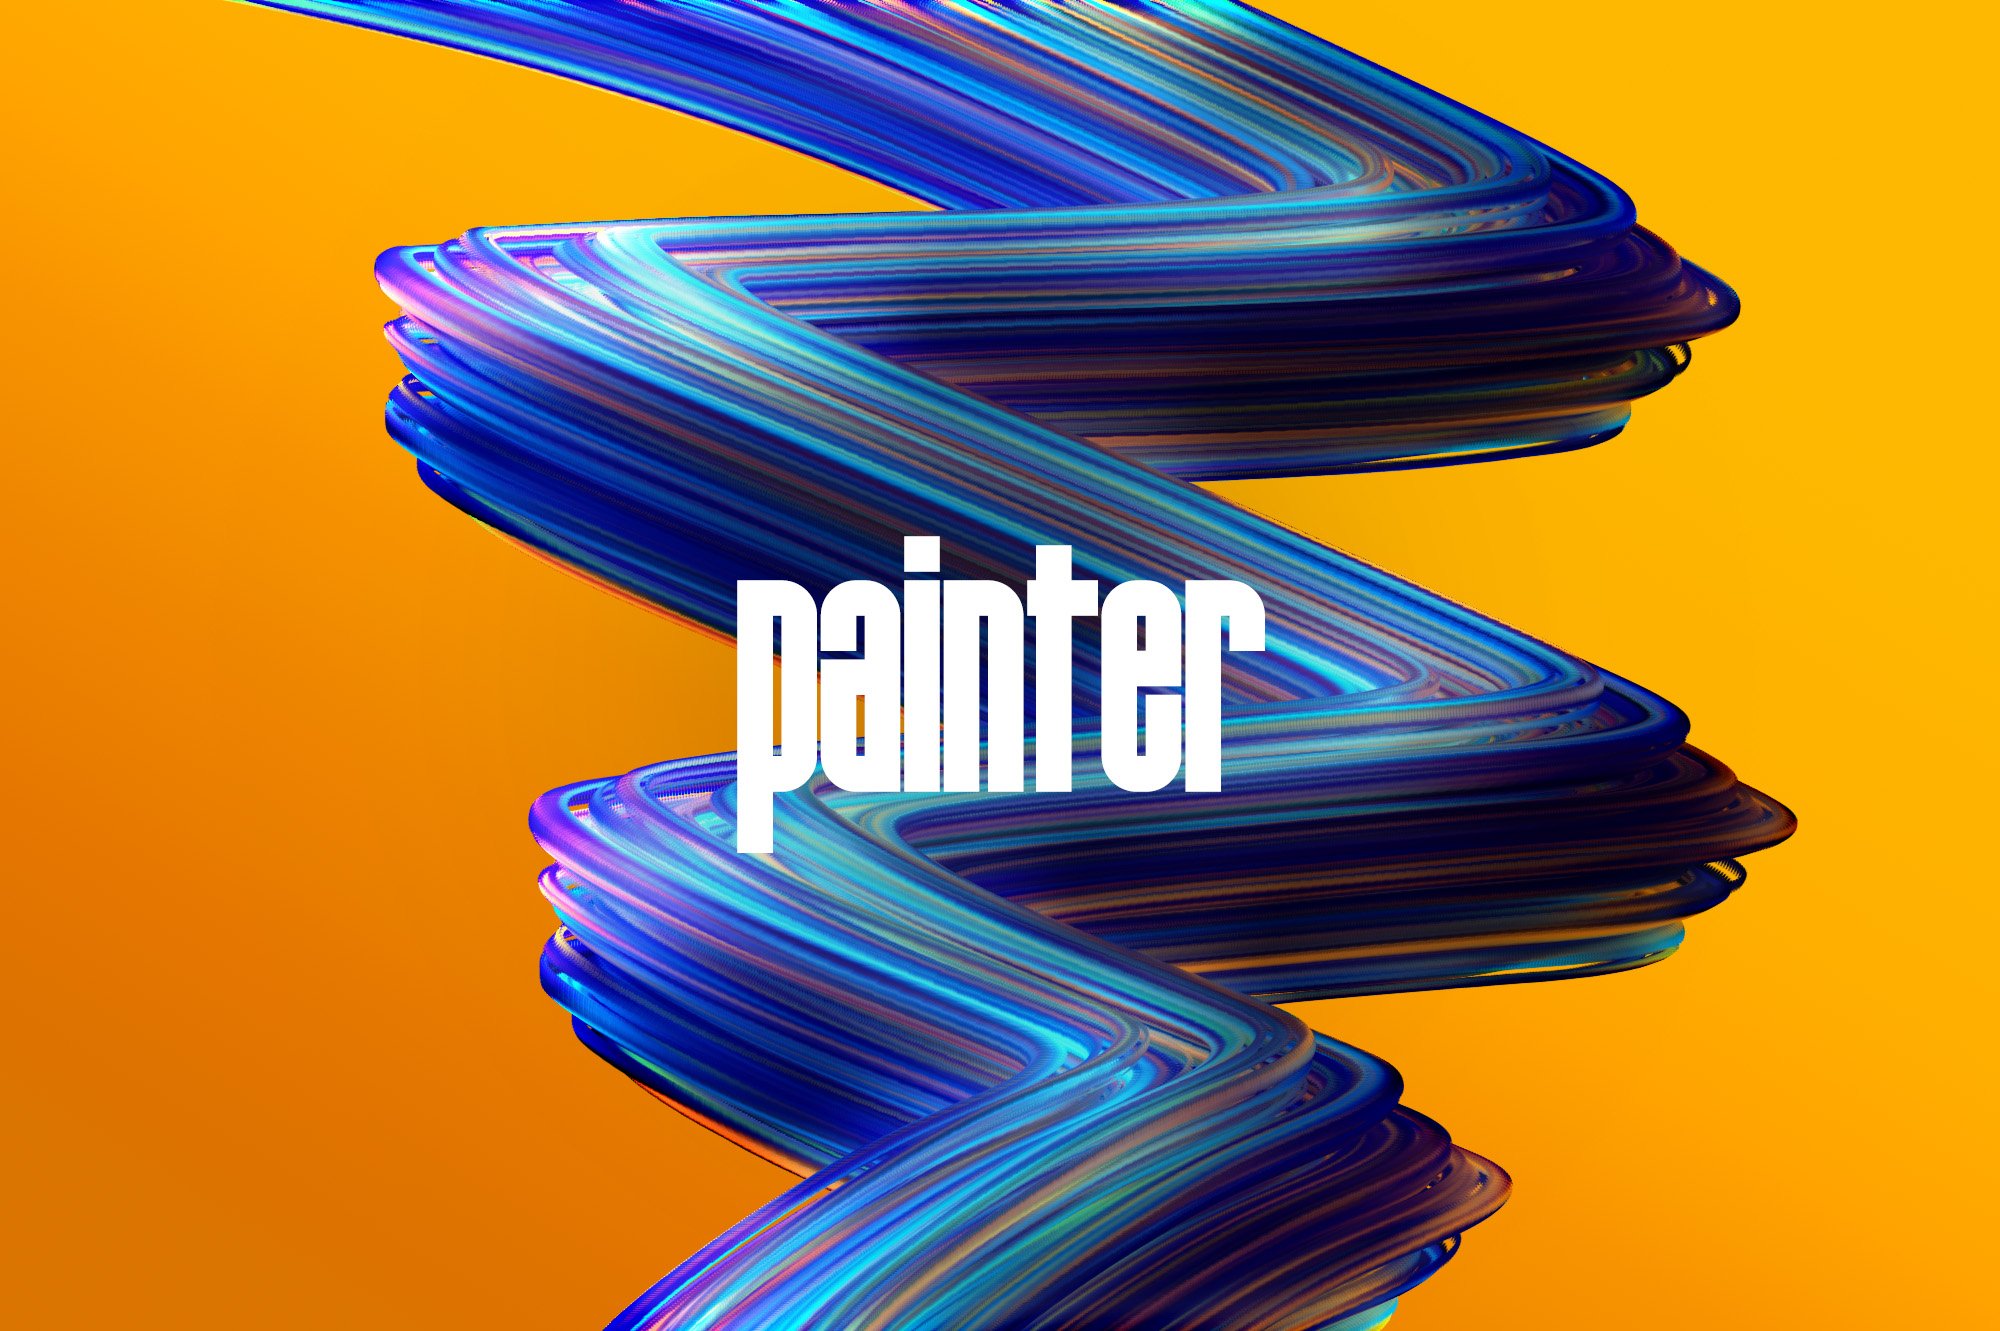 16 painter preview example 04 623